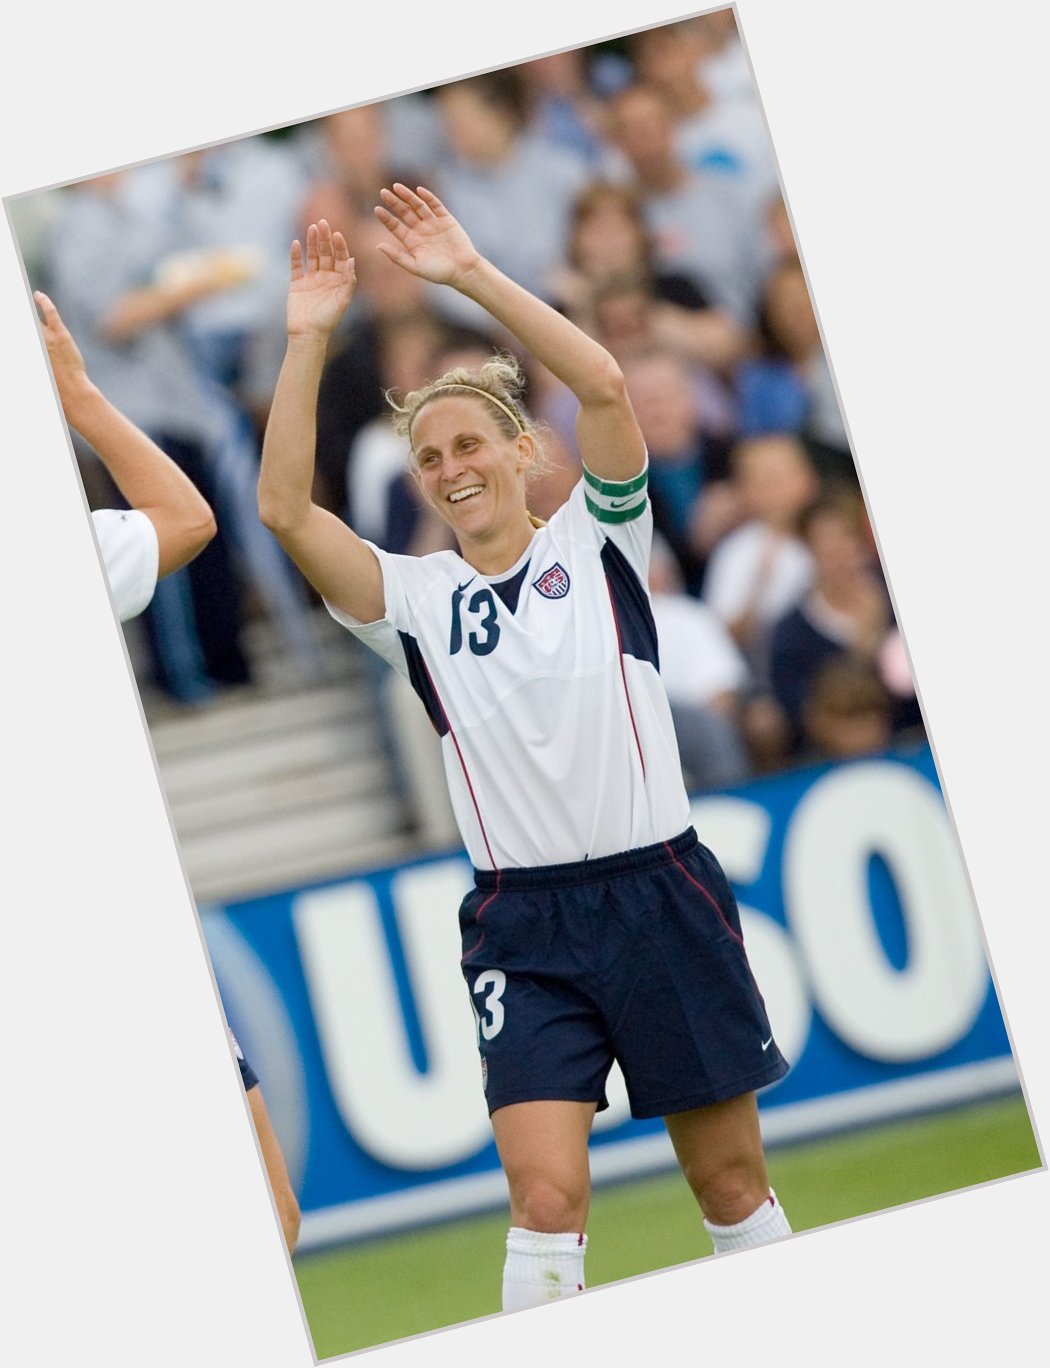 Happy birthday to the most capped  player of all time, Kristine Lilly!  John Todd 